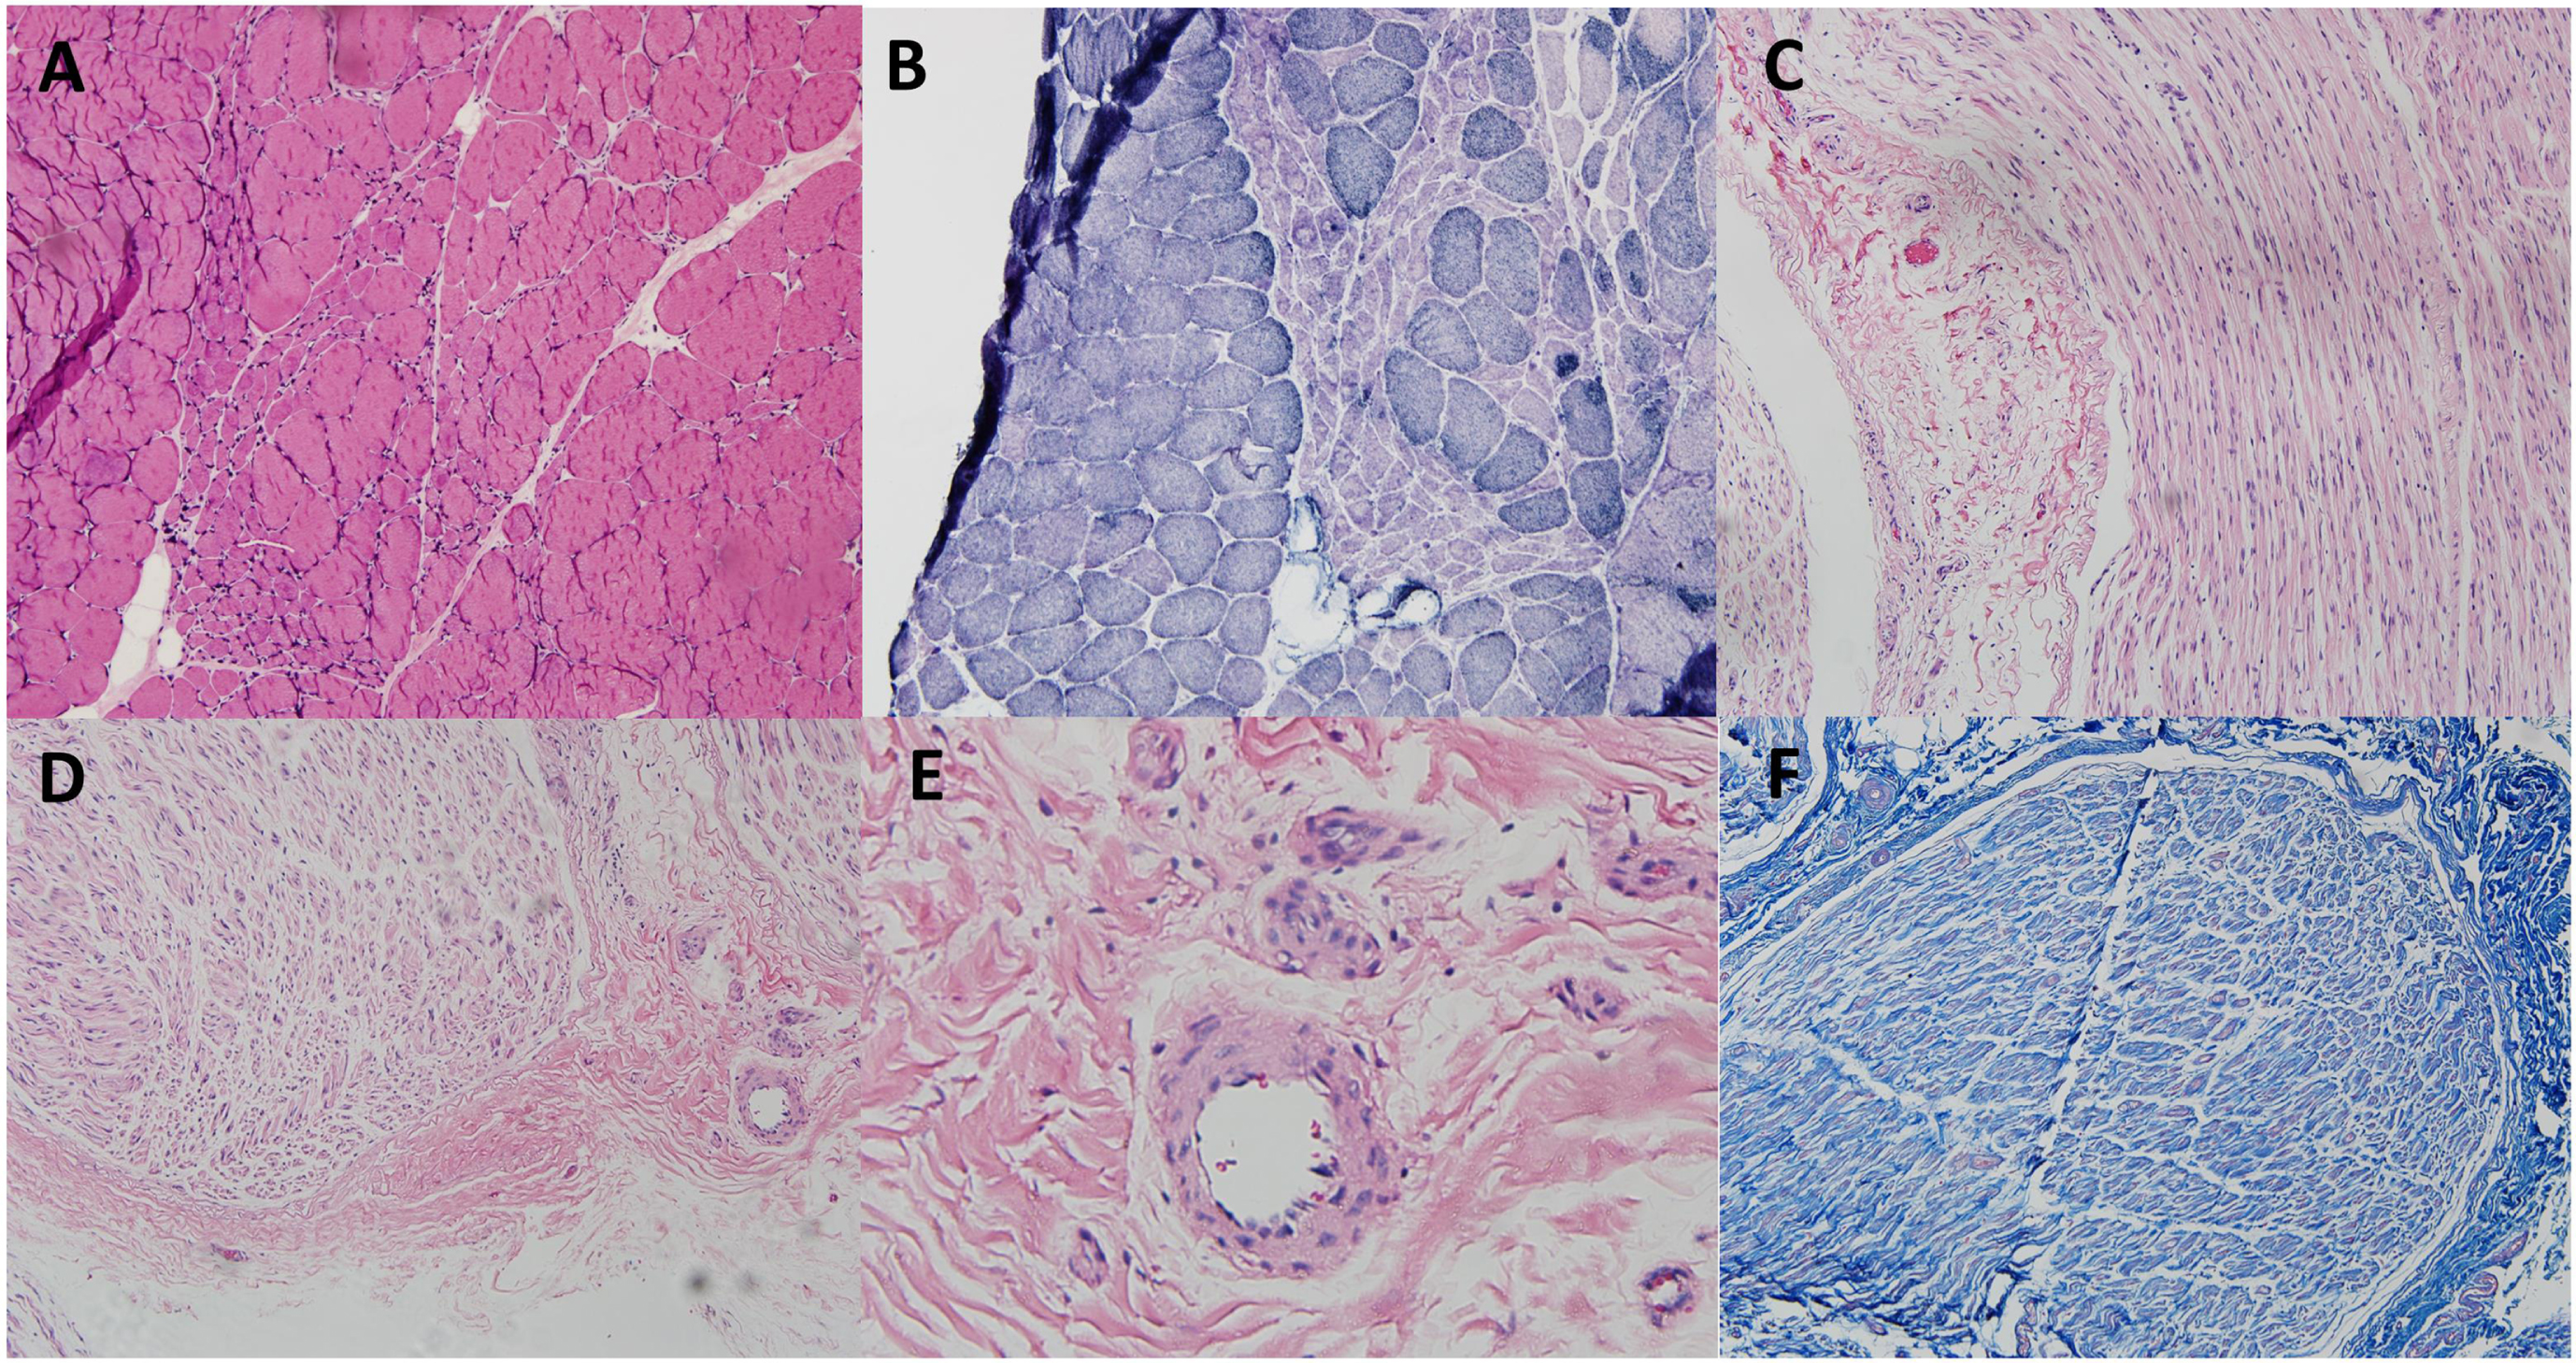 Combined muscle and nerve biopsy in patient 31. The staining of hematoxylin and eosin (H&E) (A) and nicotinamide adenine dinucleotide-tetrazolium reductase (B) showed grouped atrophy in the right peroneal brevis muscle. The biopsy in the right superficial peroneal nerve did not show thickening of small vessels, lymphocyte infiltration, red blood cell extravasation in H&E (C-E) and Masson’s trichrome staining (F).